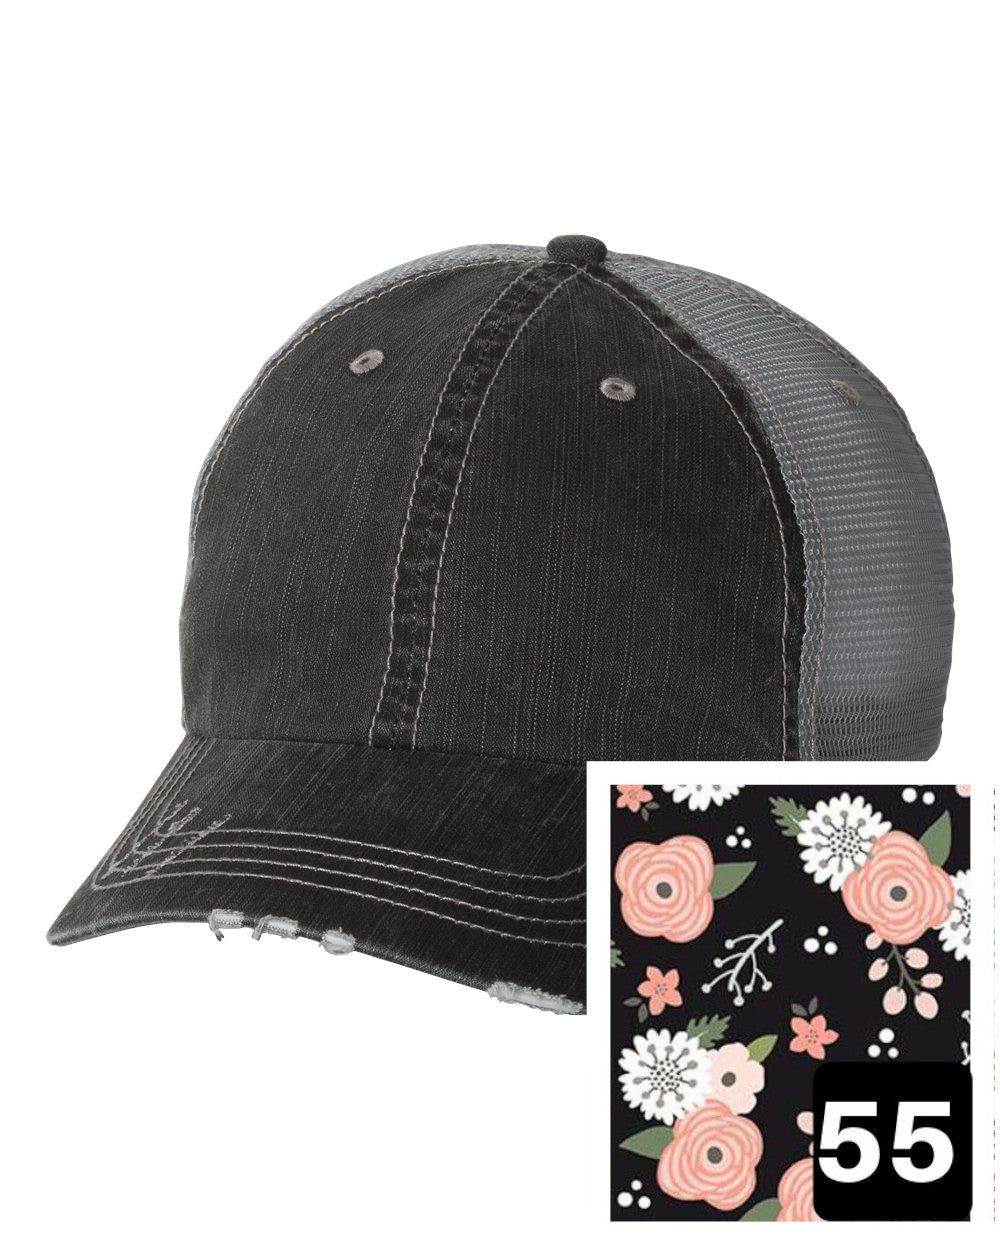 gray distressed trucker hat with petite floral on navy fabric state of Louisiana